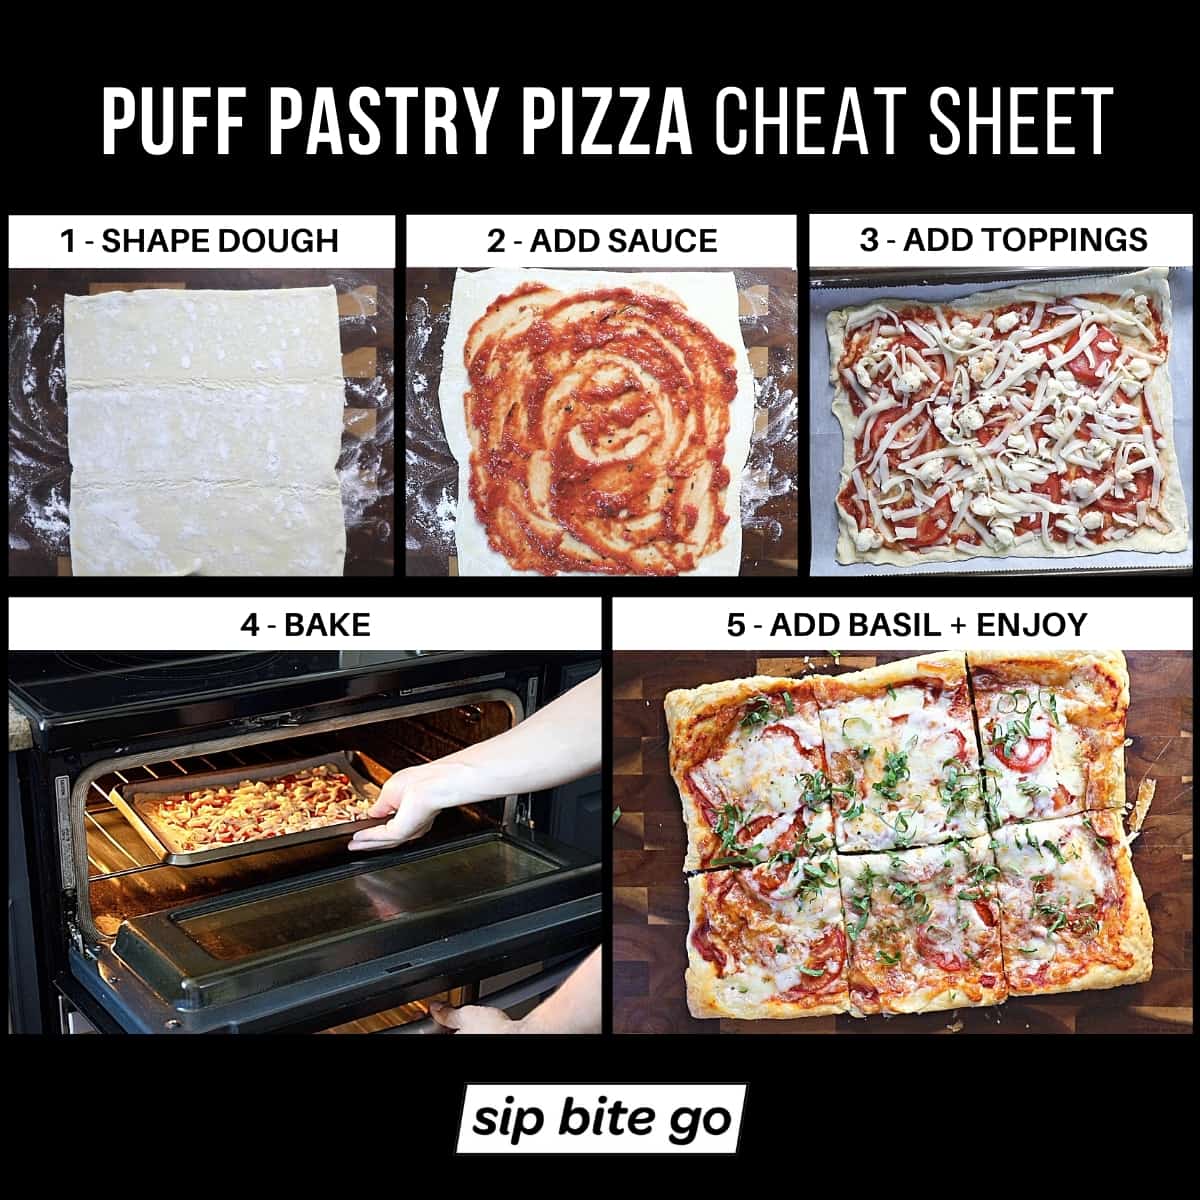 Infographic chart with steps for making Puff Pastry Pizza Recipe.